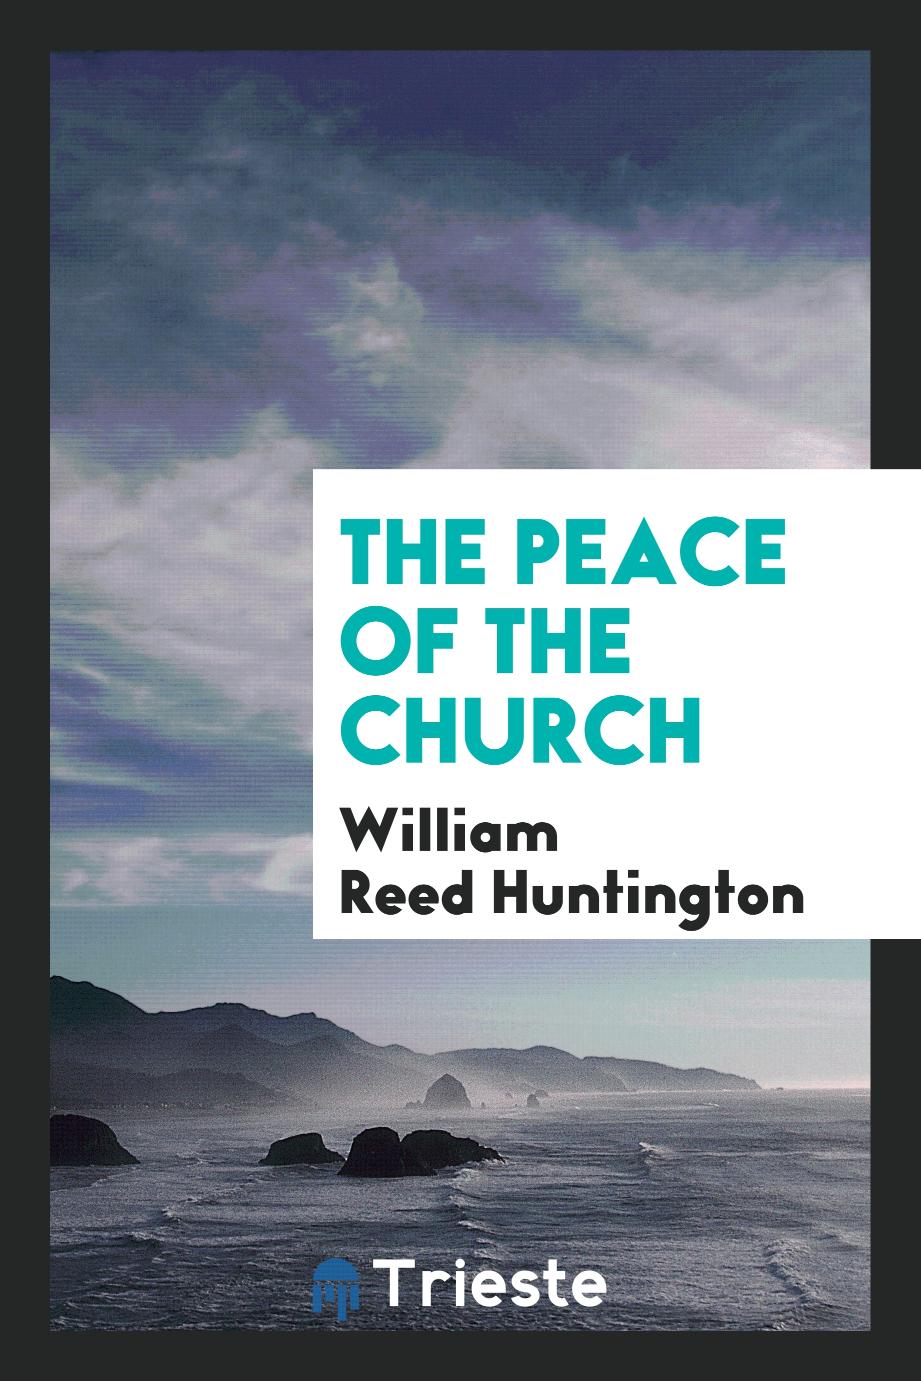 The peace of the church